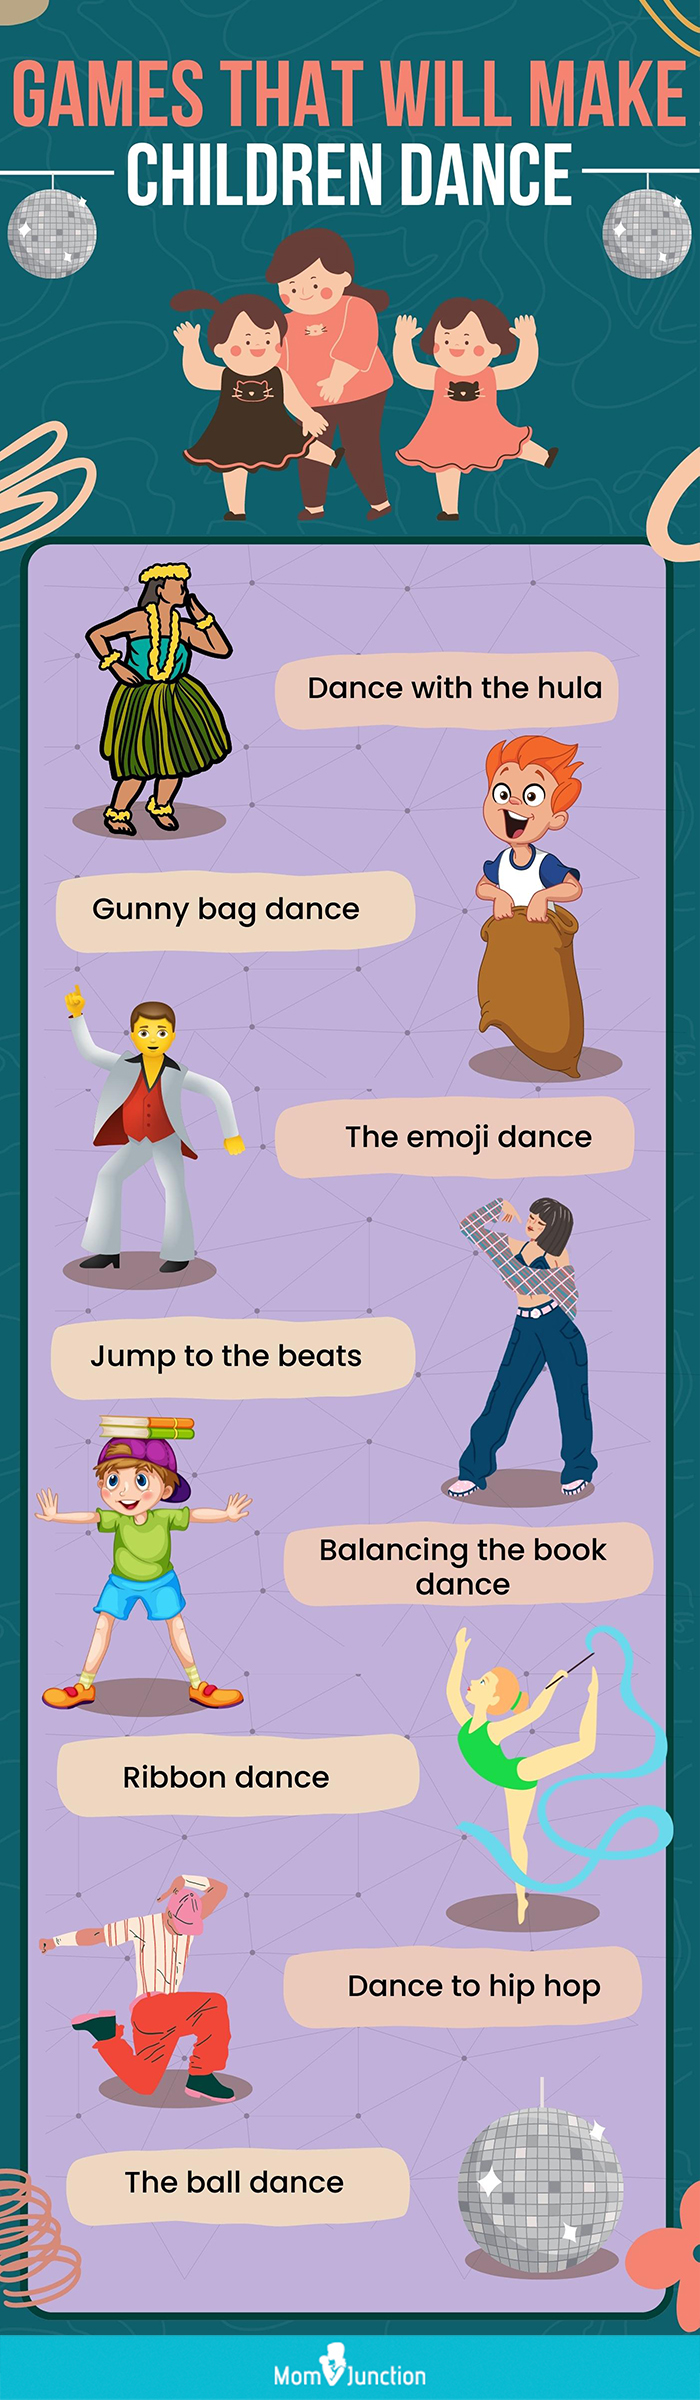 5 Steps for Hosting an Amazing Kids' Dance Party